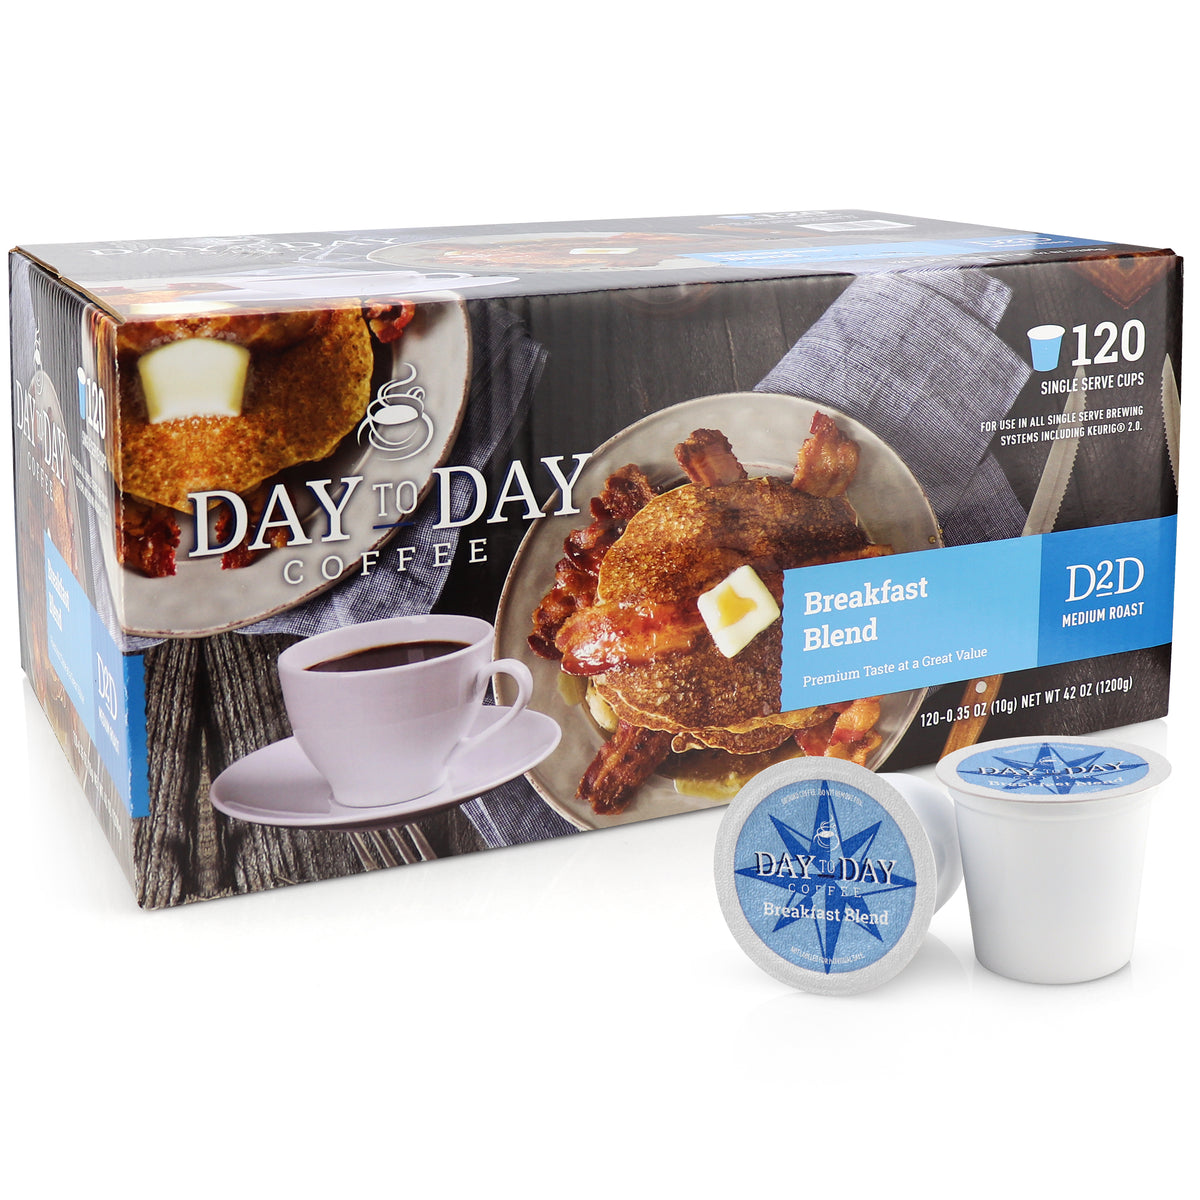 Day to day coffee 120 count breakfast blend medium roast coffee pods for single serve coffee brewer